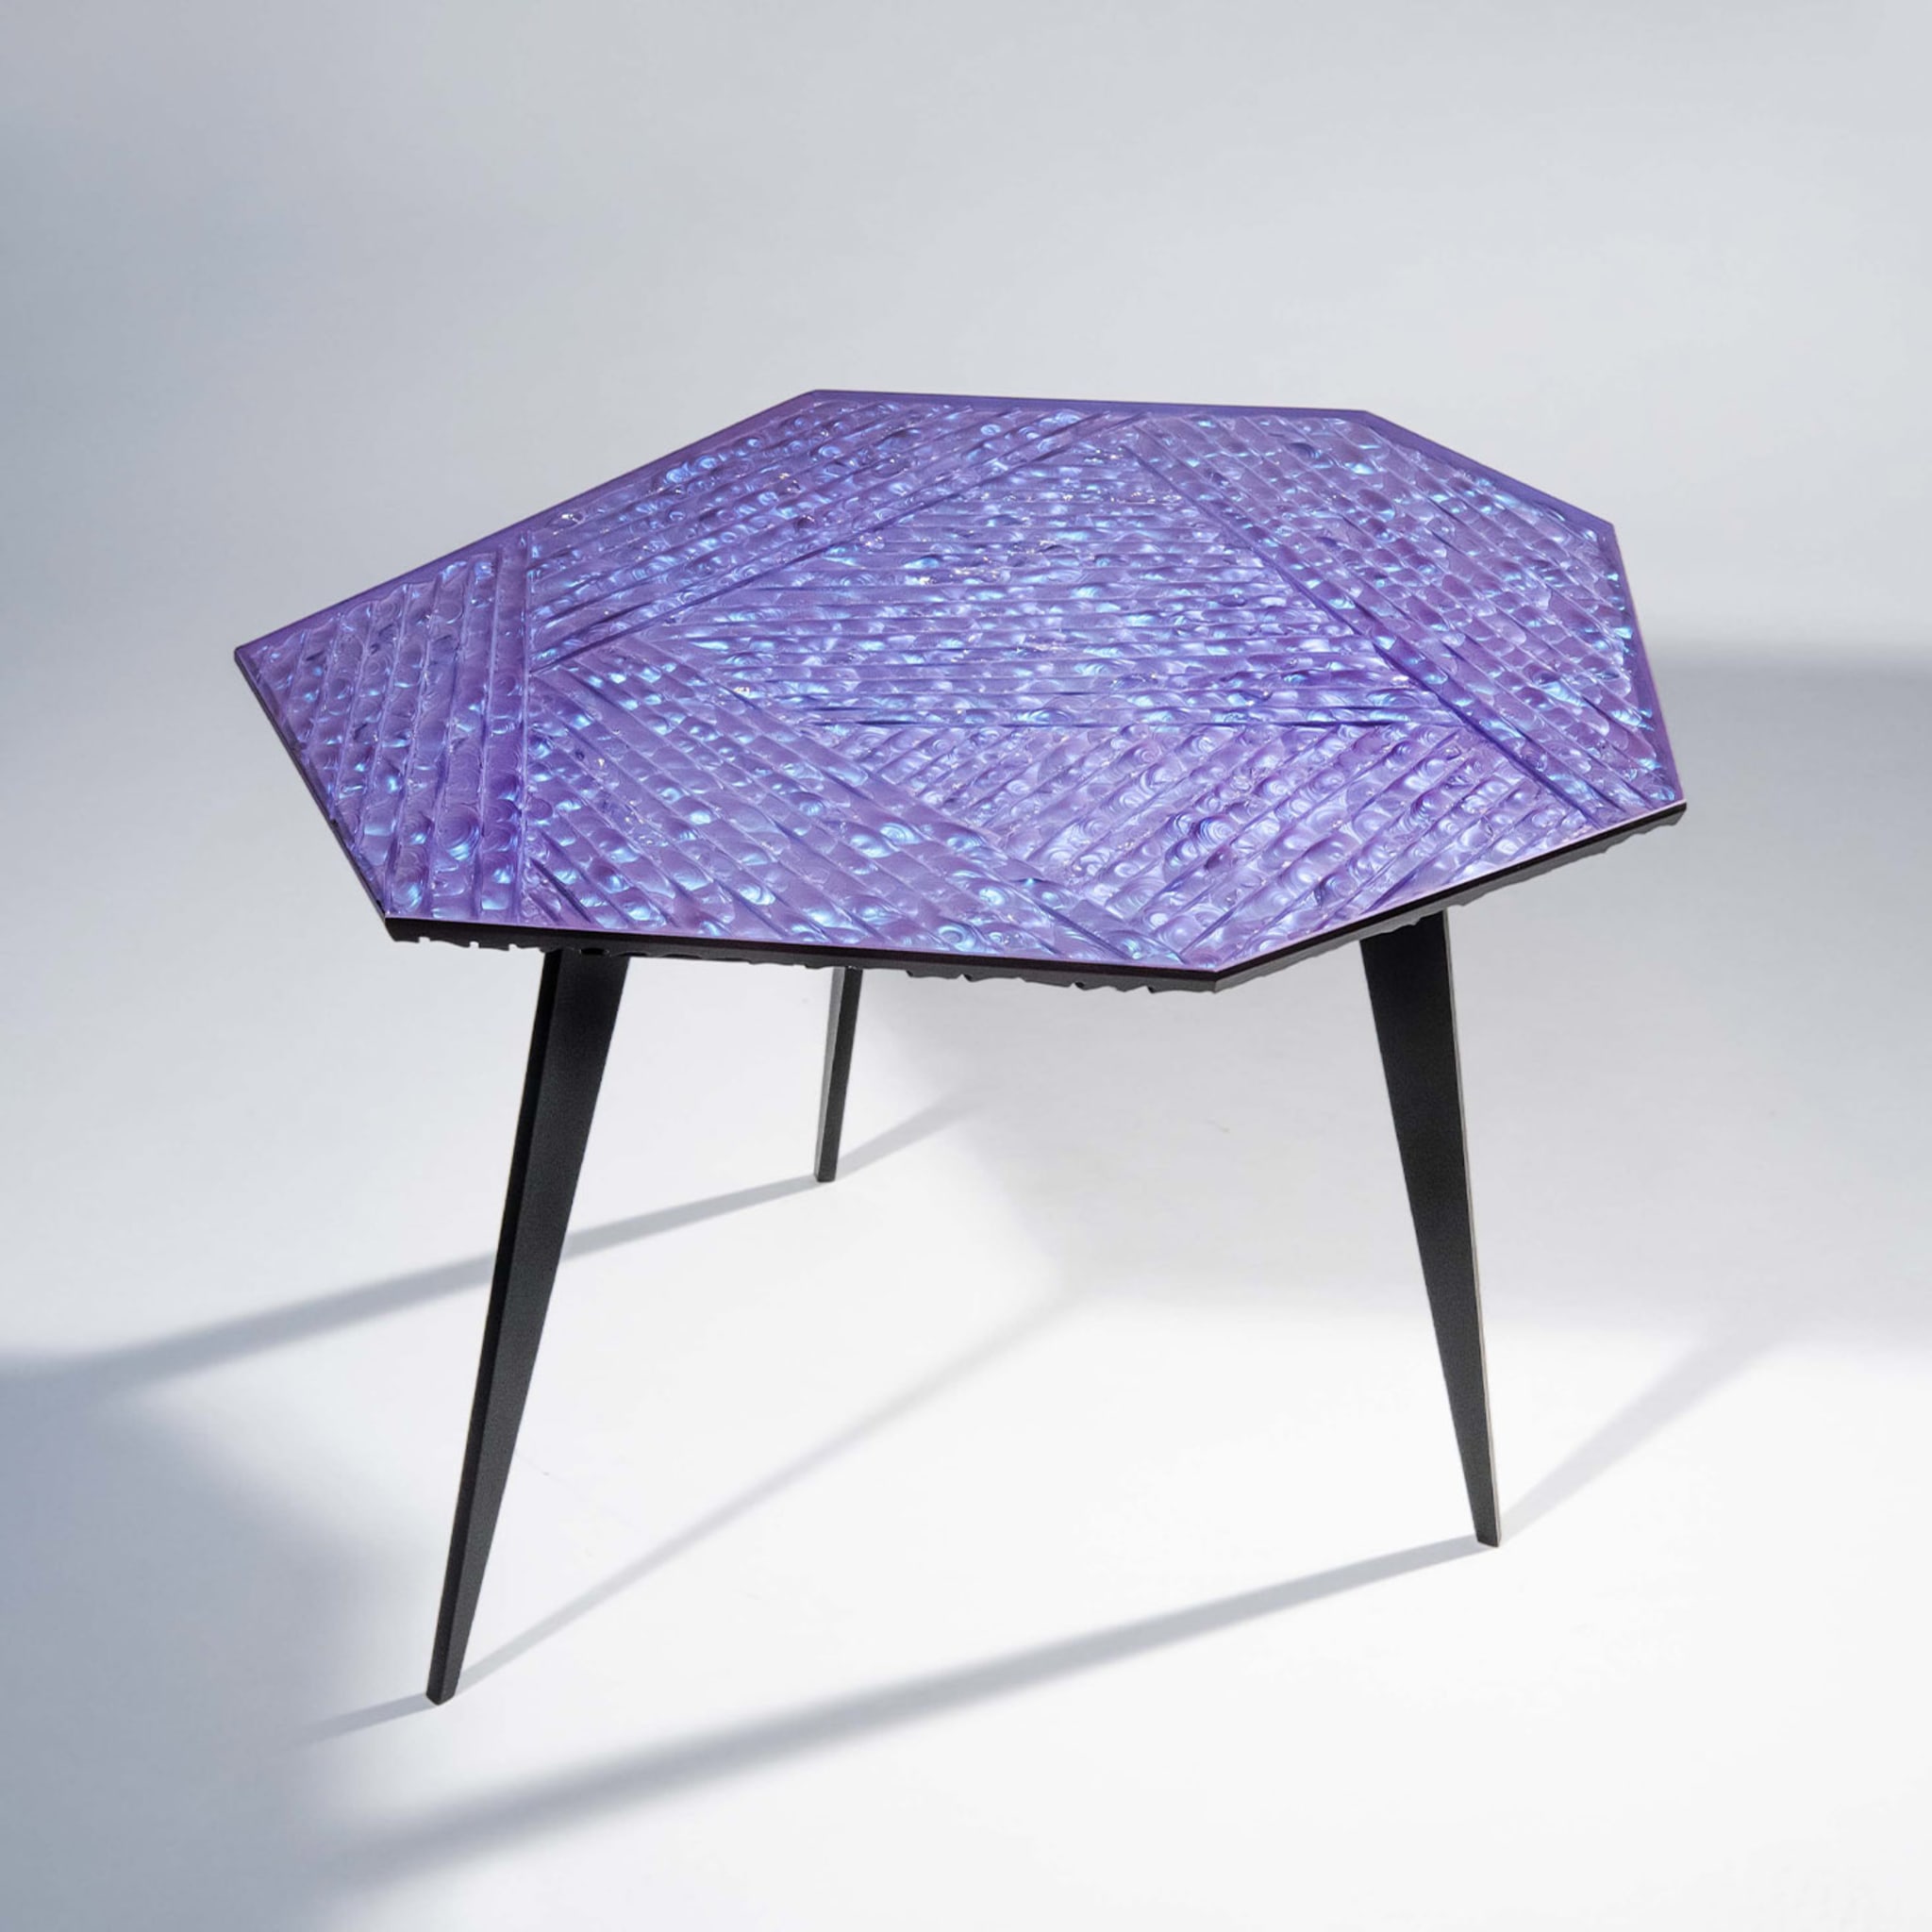 Velluto Iridescent Crystal Coffee Table - Alternative view 4